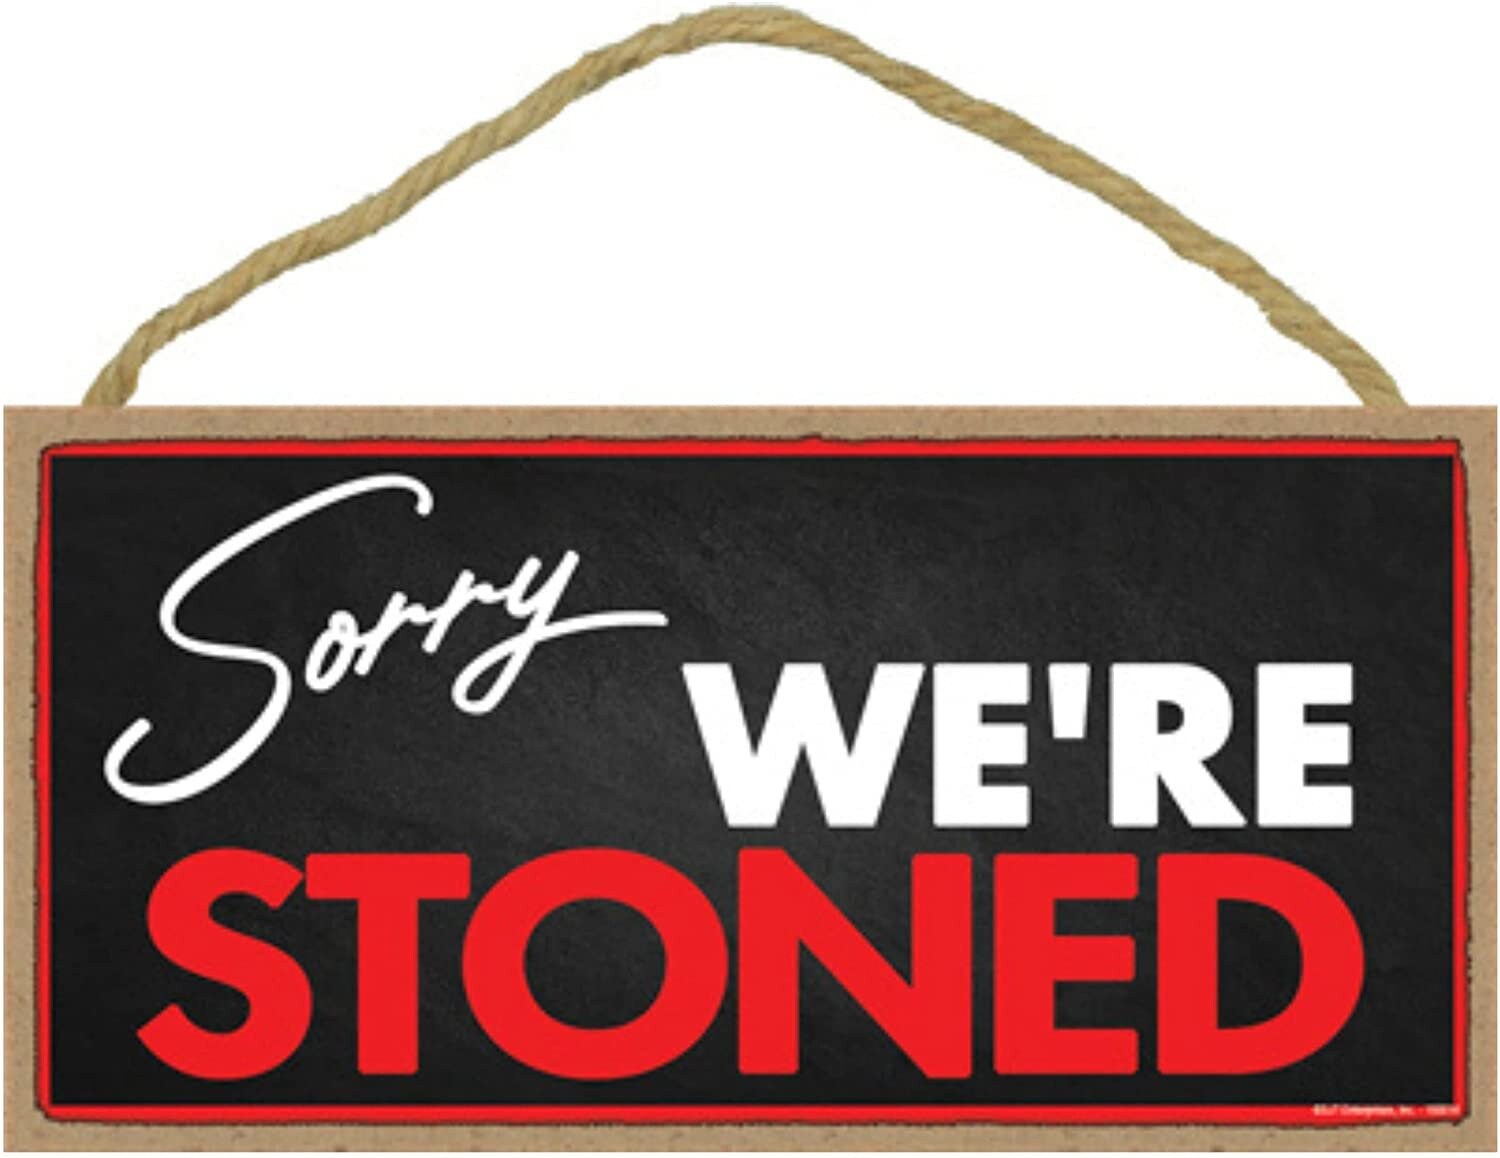 Handmade Sign SORRY We're Closed STONED Come Back -  Portugal